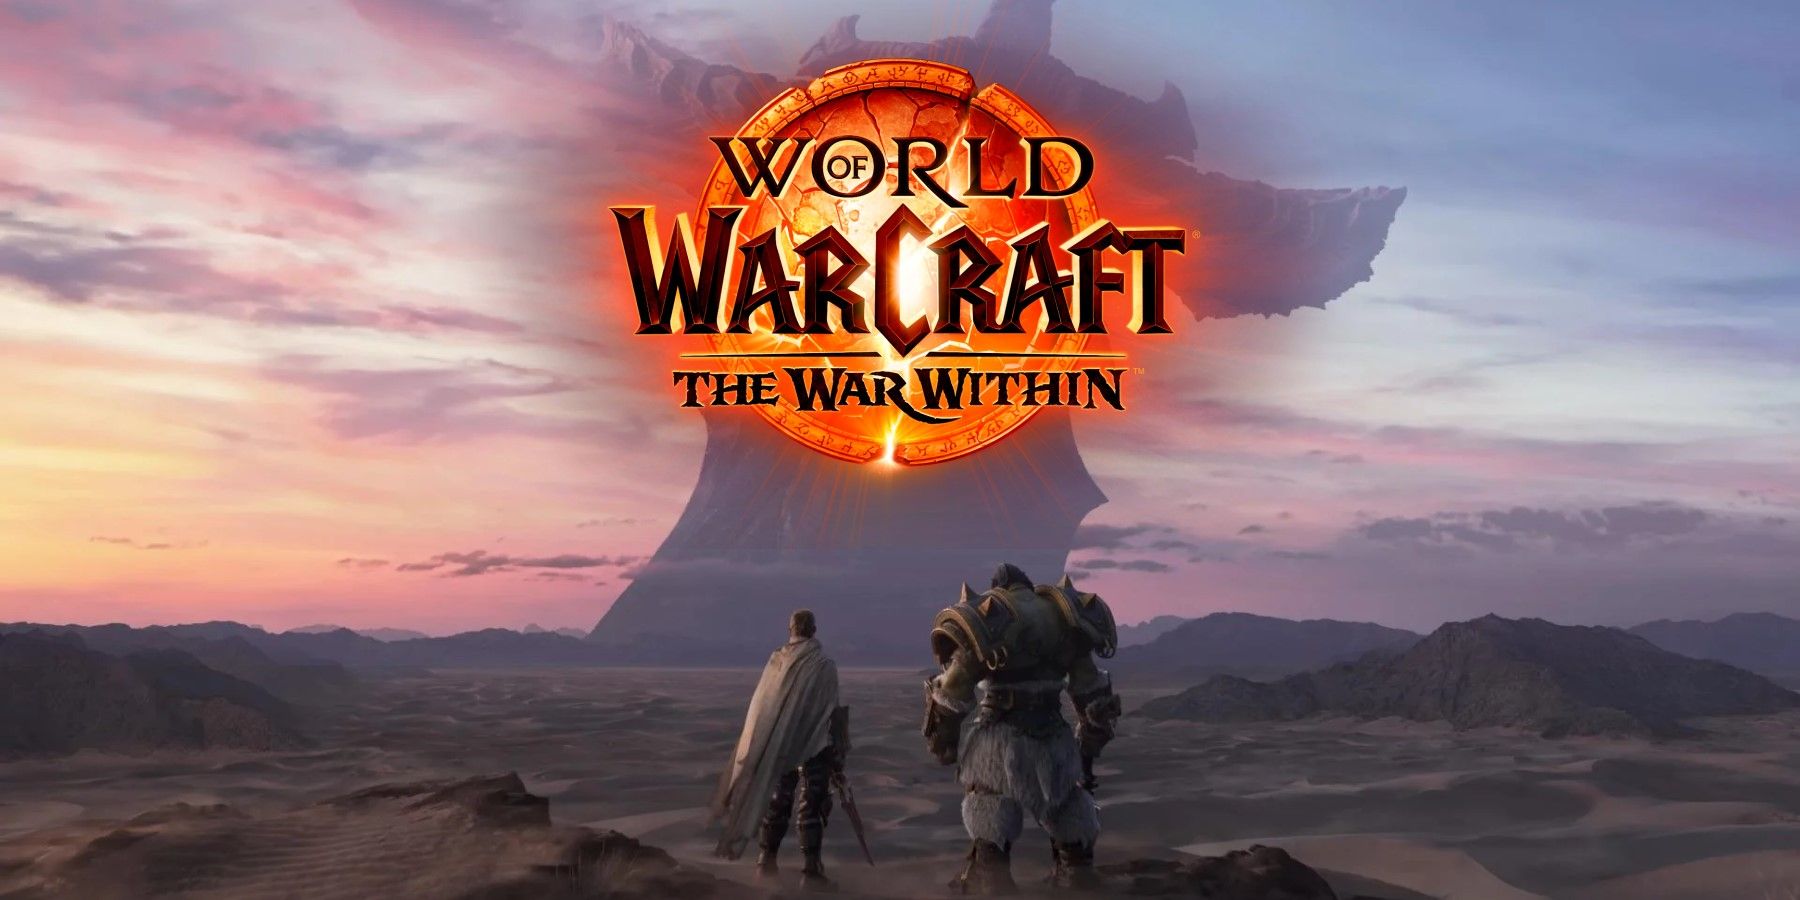 world of warcraft reveals the war within collector's edition